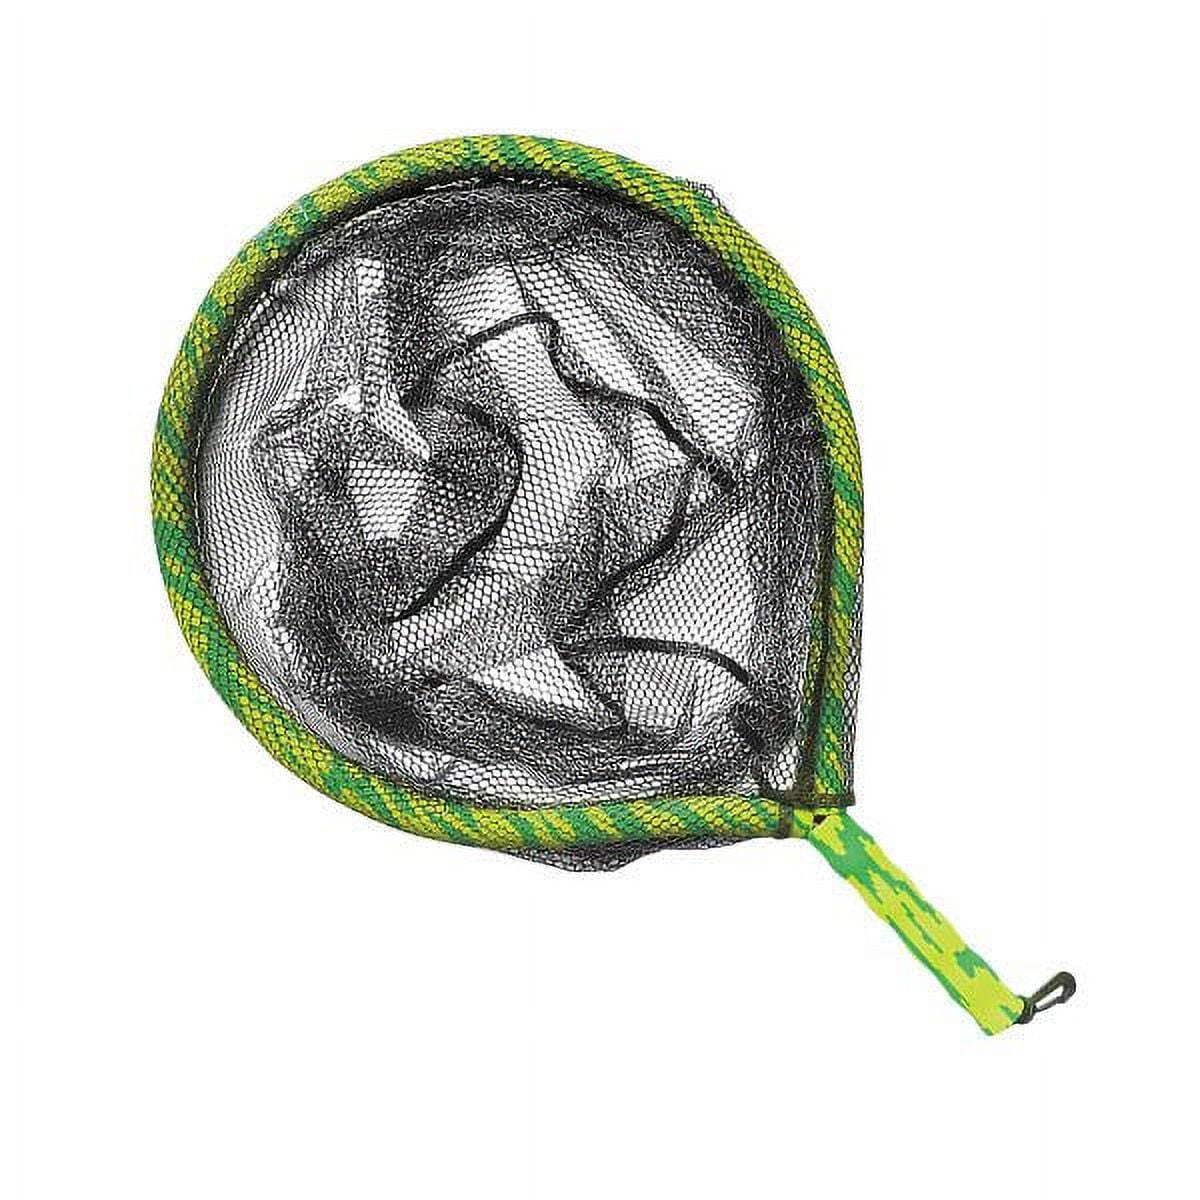 Danco Sports Floating Net with Elastic Lanyard, 30, Green and